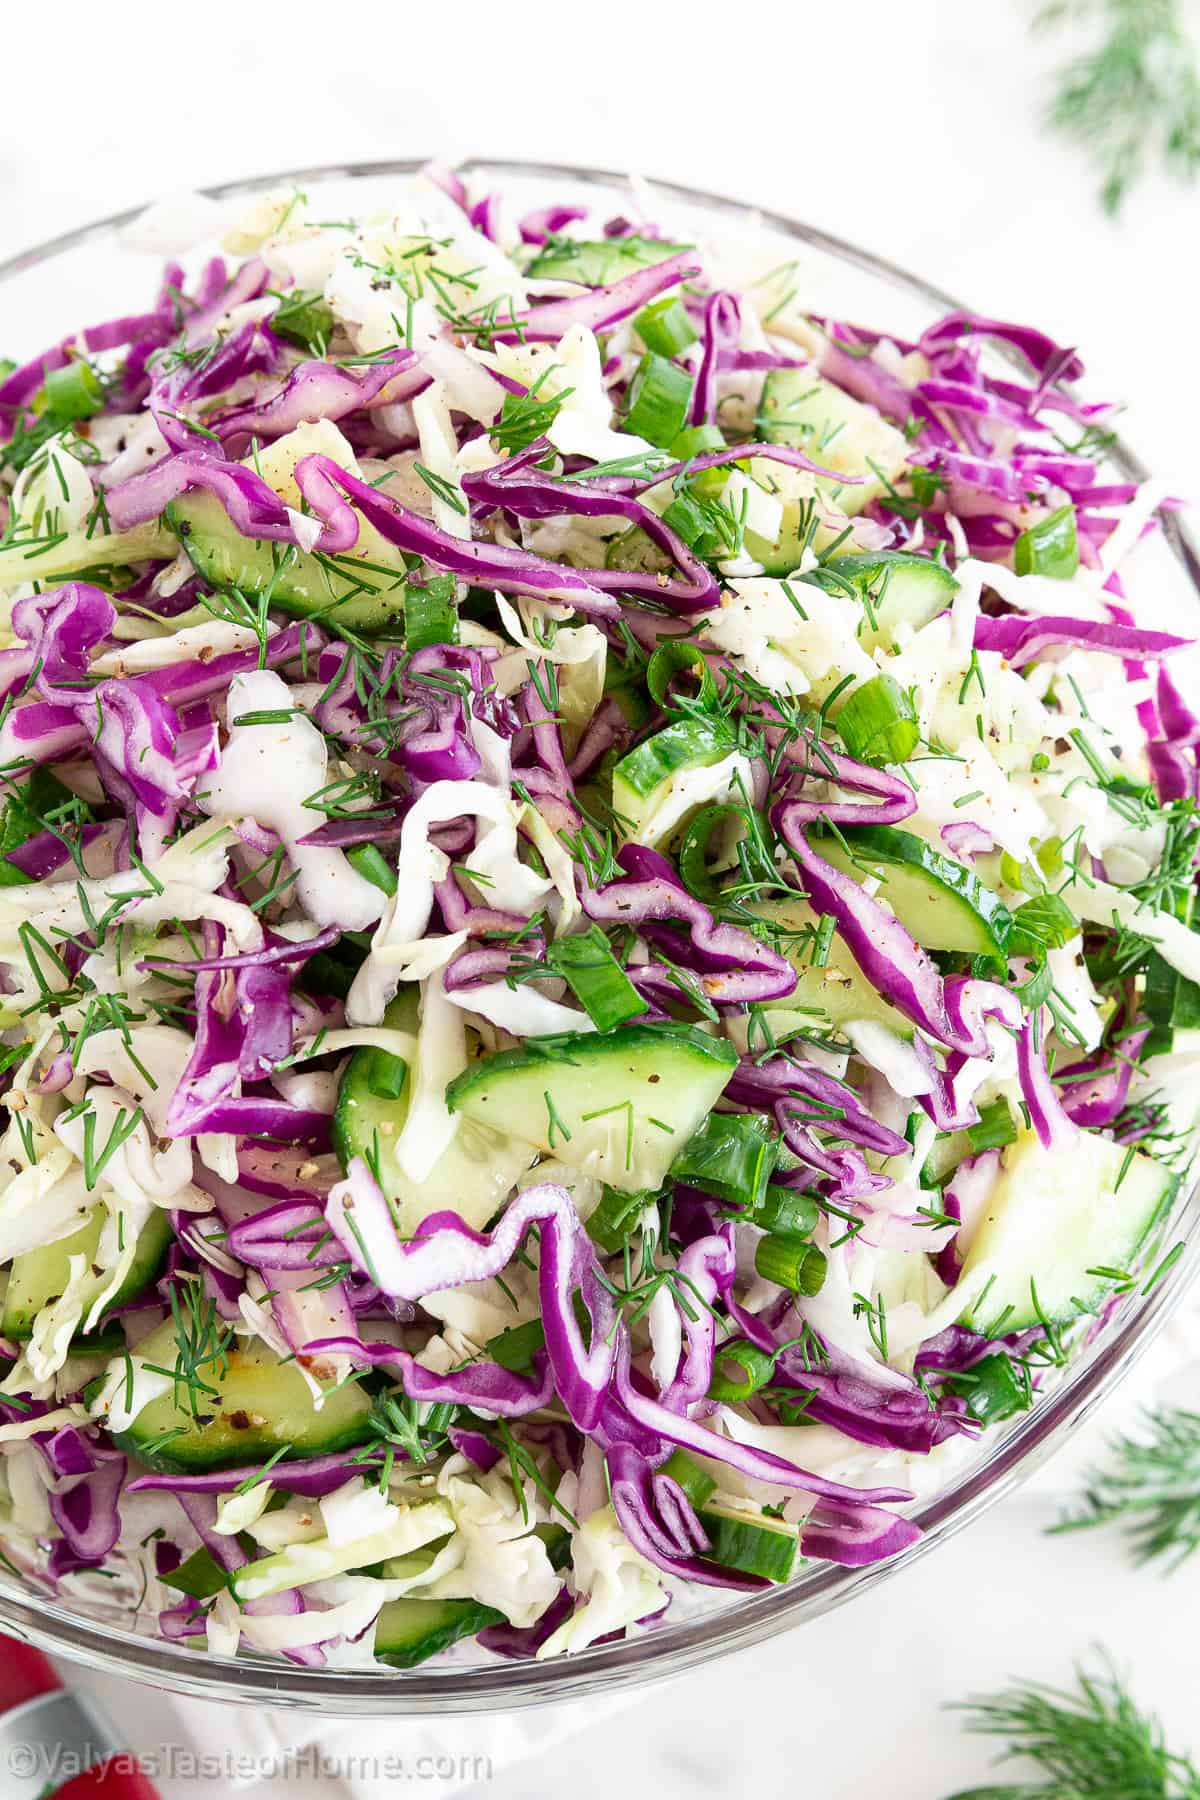 This salad is absolutely perfect as is if you follow the recipe properly, but there are some things you can add to customize it to your own preferences.